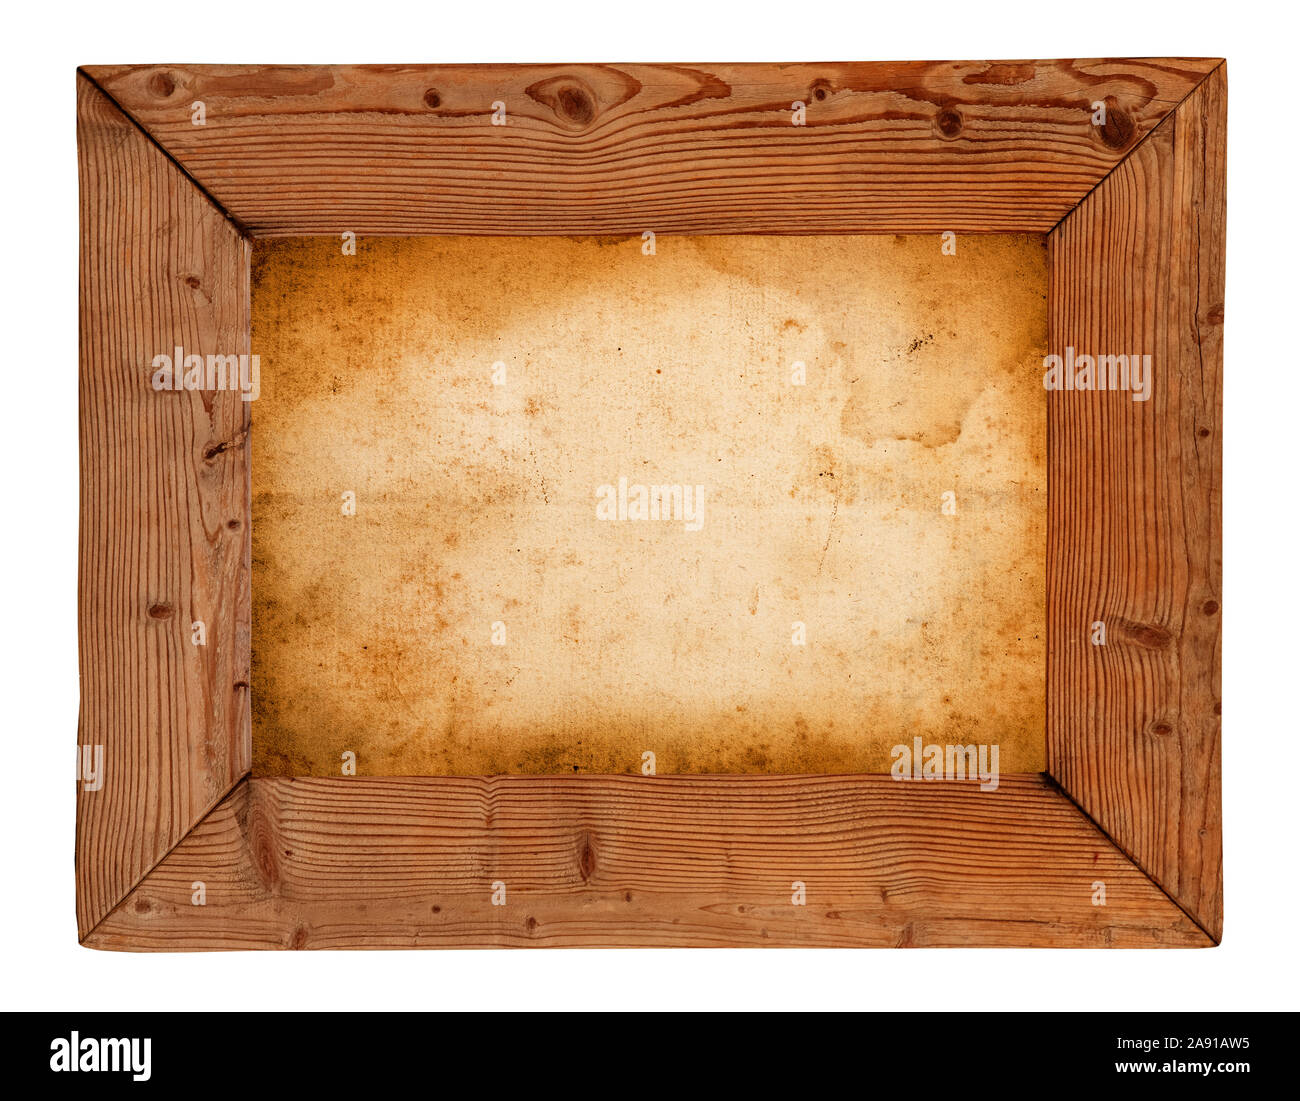 Wood frame with paper fill isolated on white Stock Photo